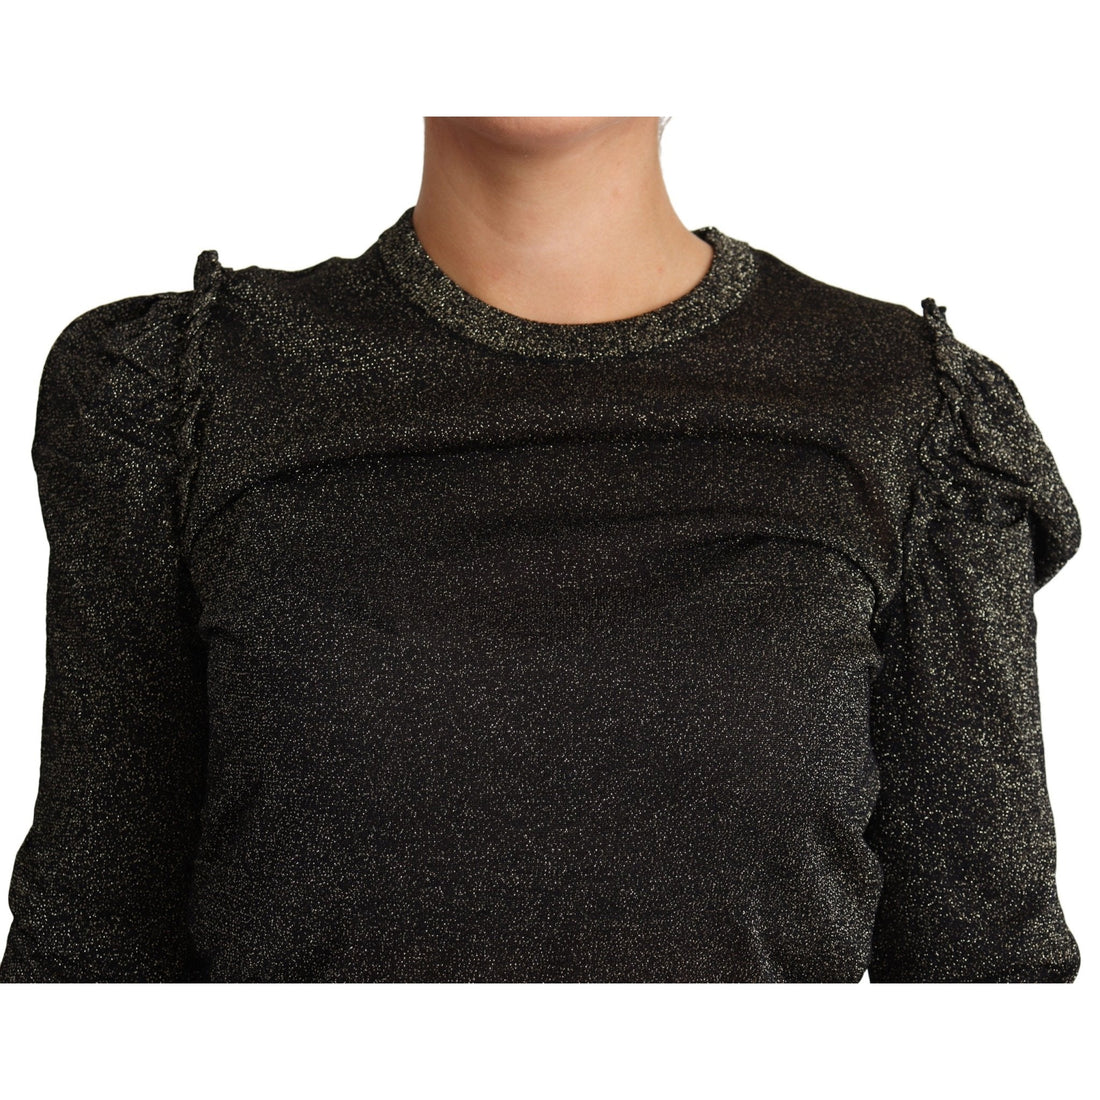 Dolce & Gabbana Black Gold Cropped Women Pullover Sweater - Paris Deluxe